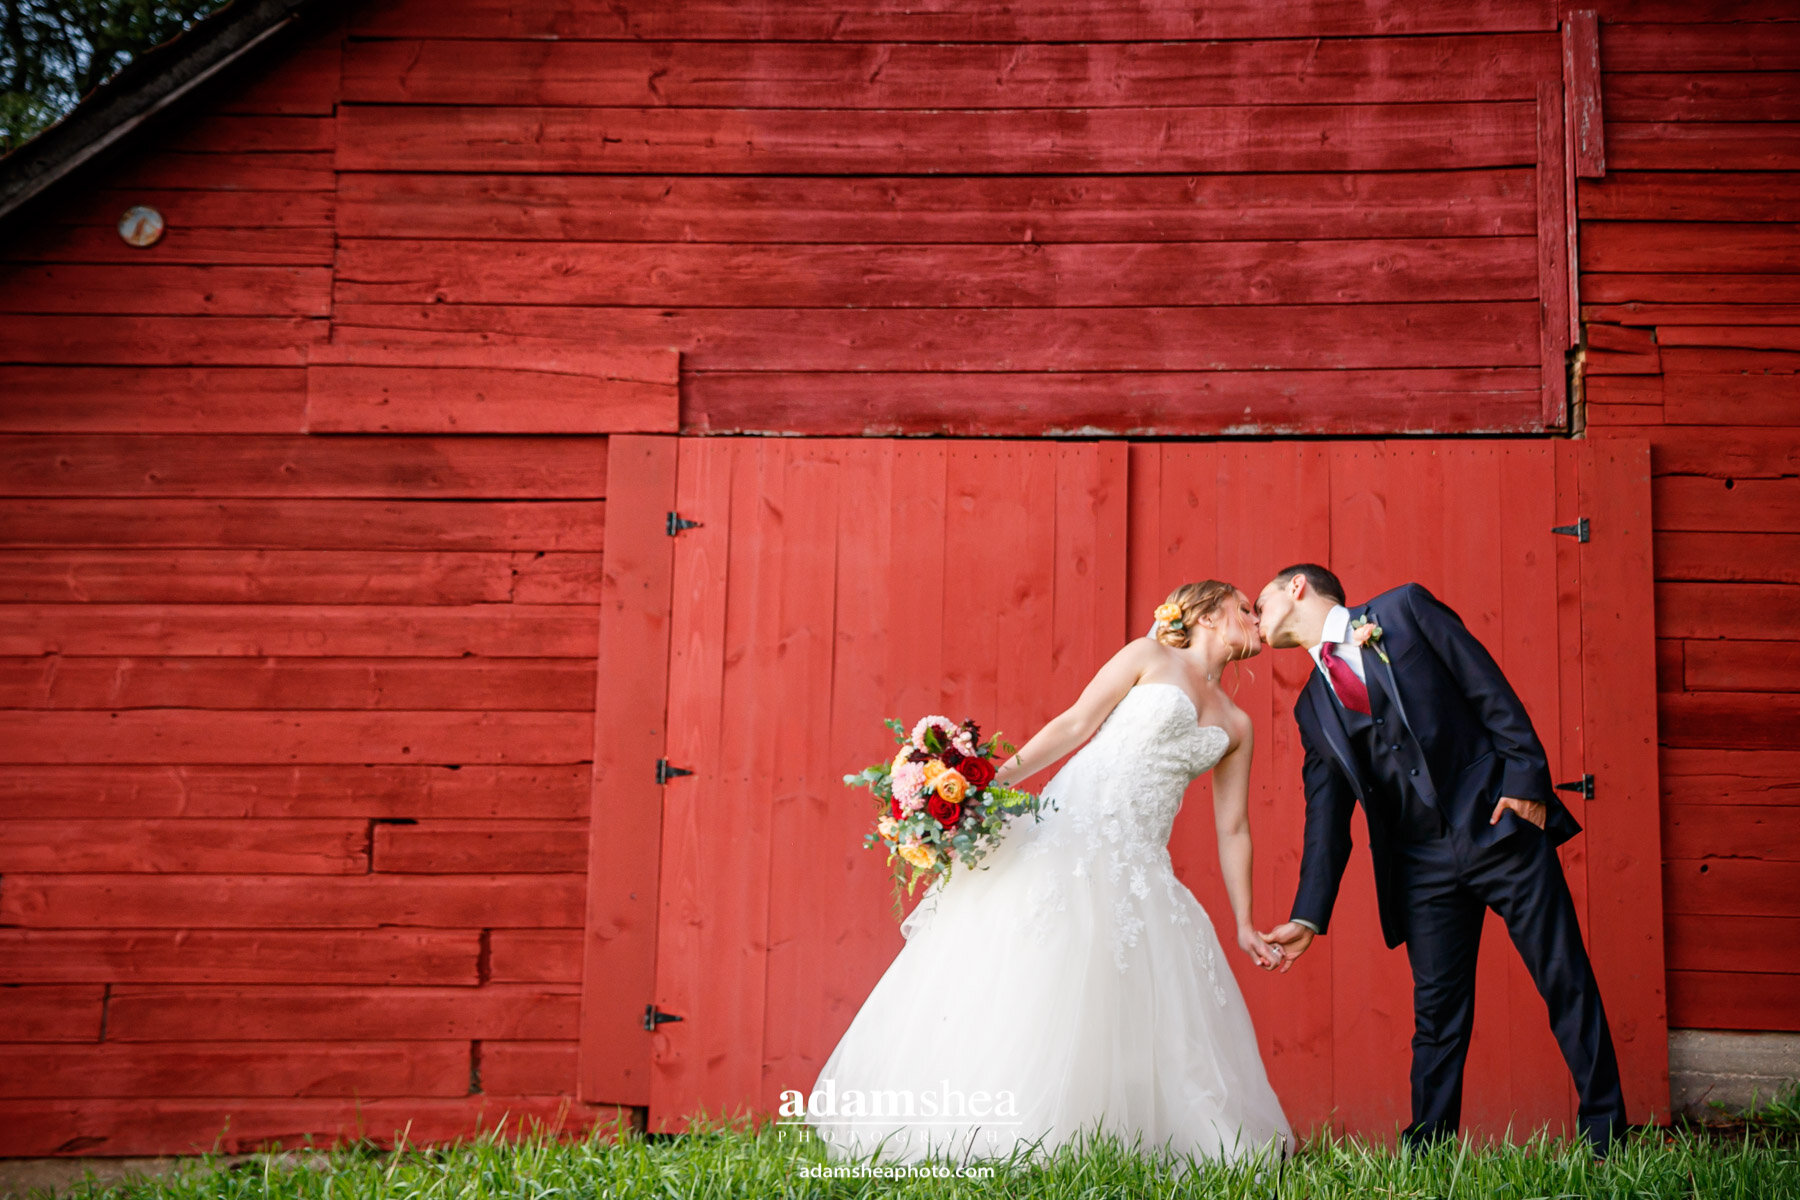 Gorgeous Wedding Fields at the Reserve - Stoughton WI - Adam Shea Photography - Red Barn